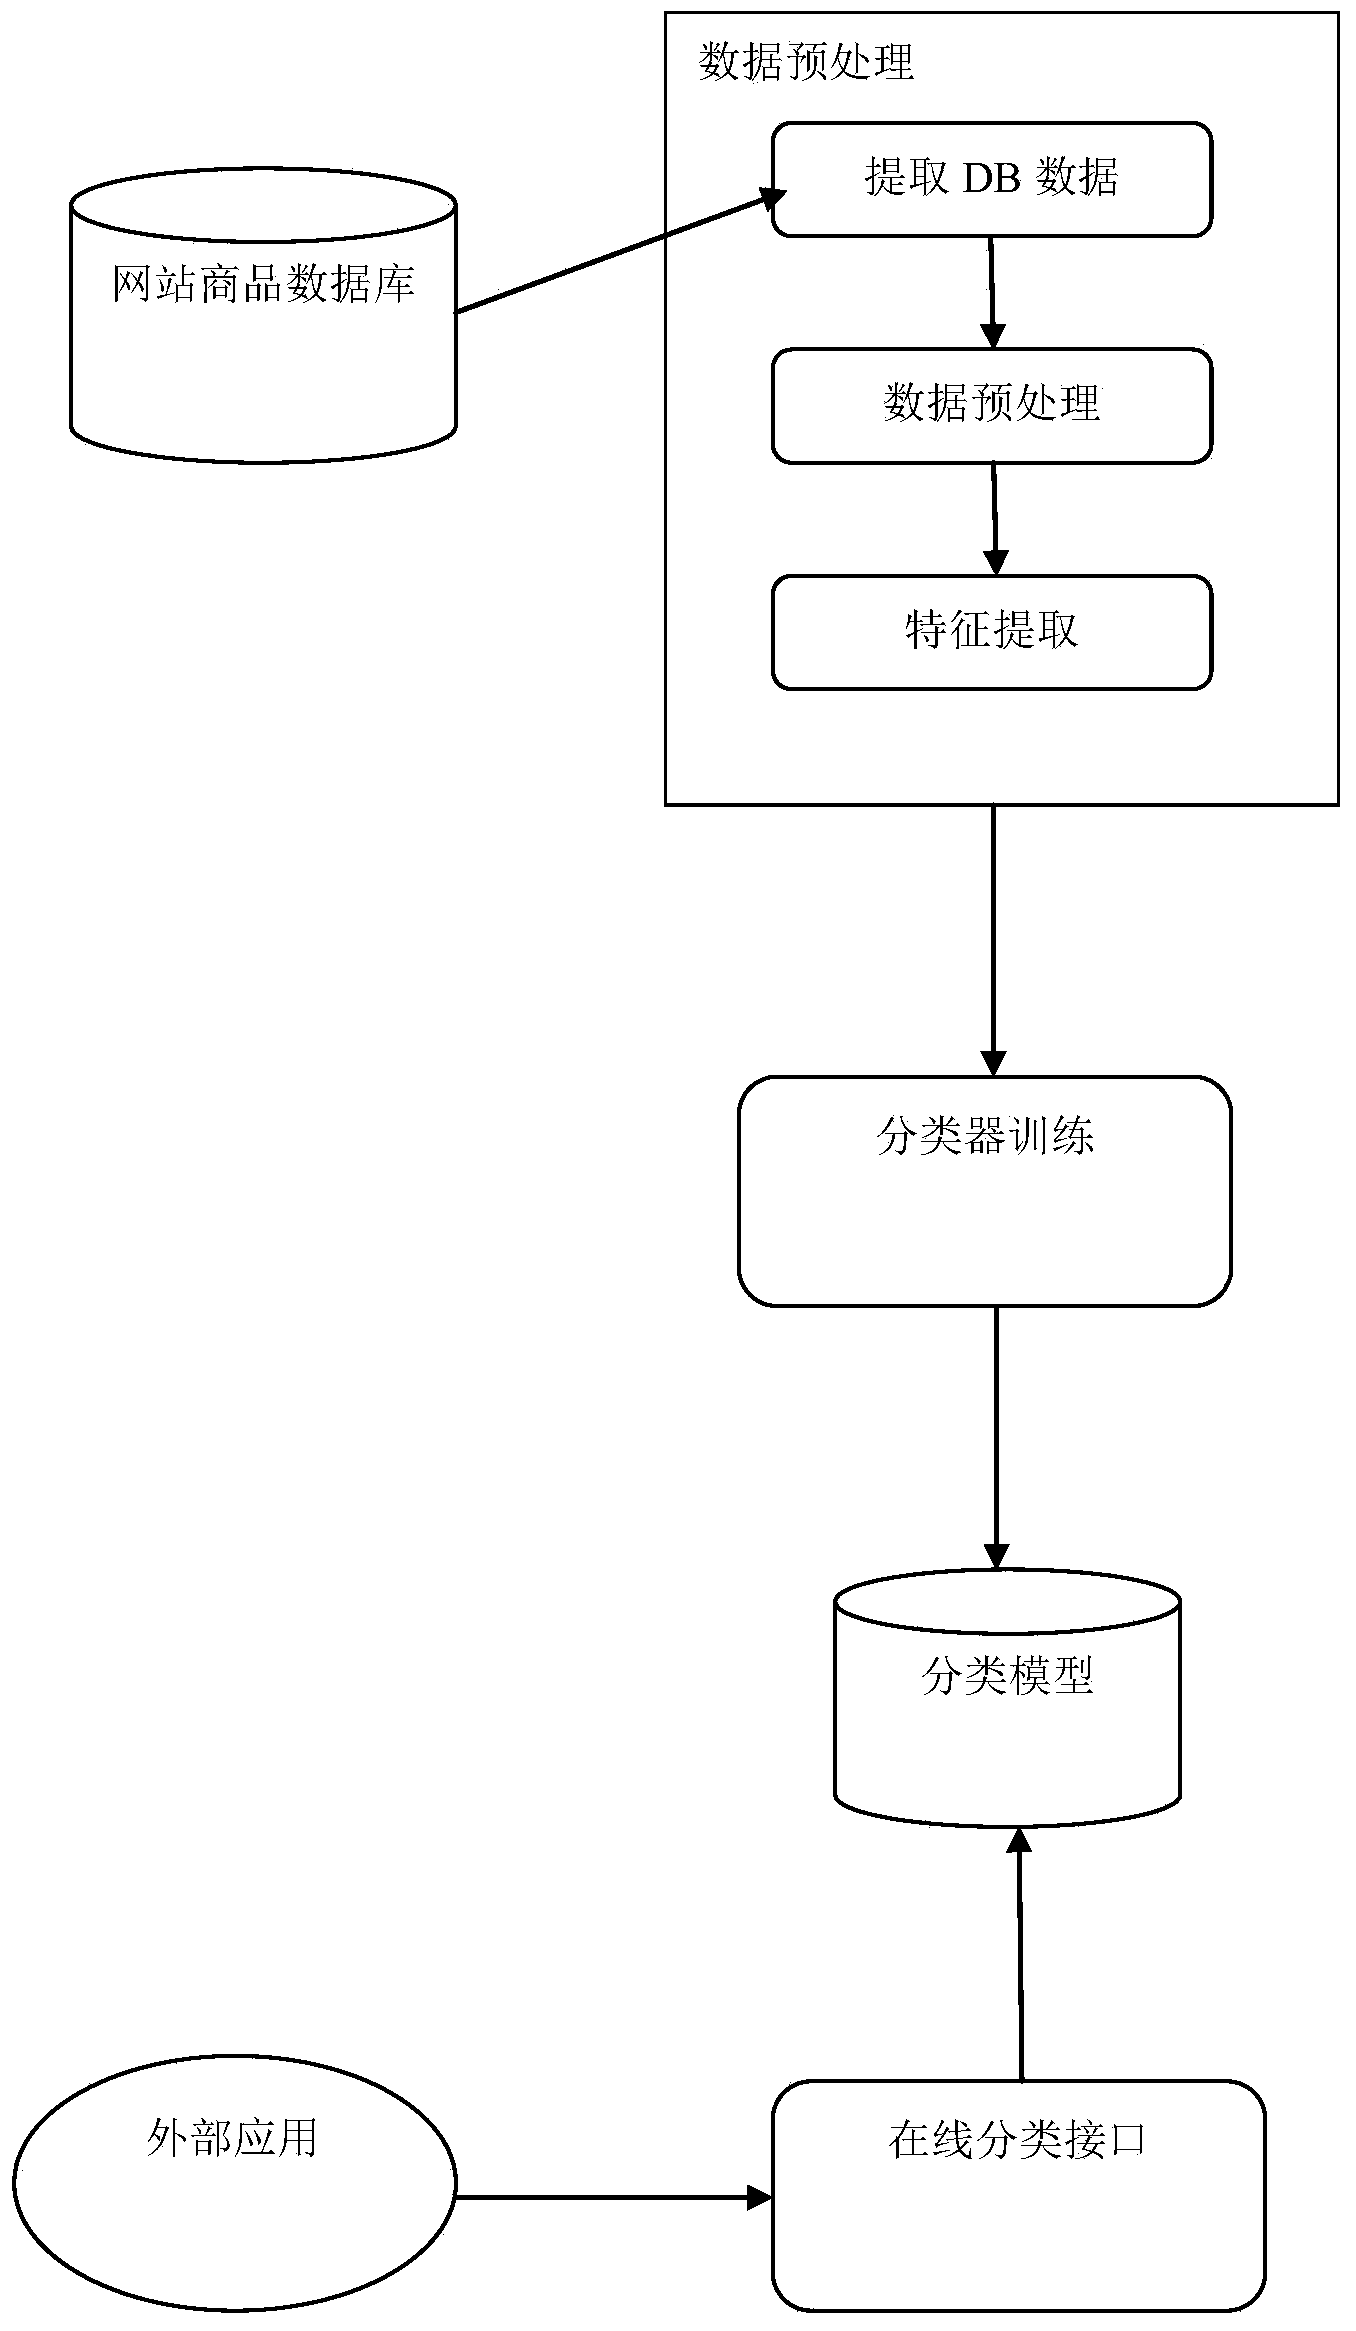 Text based commodity classification treatment method and system